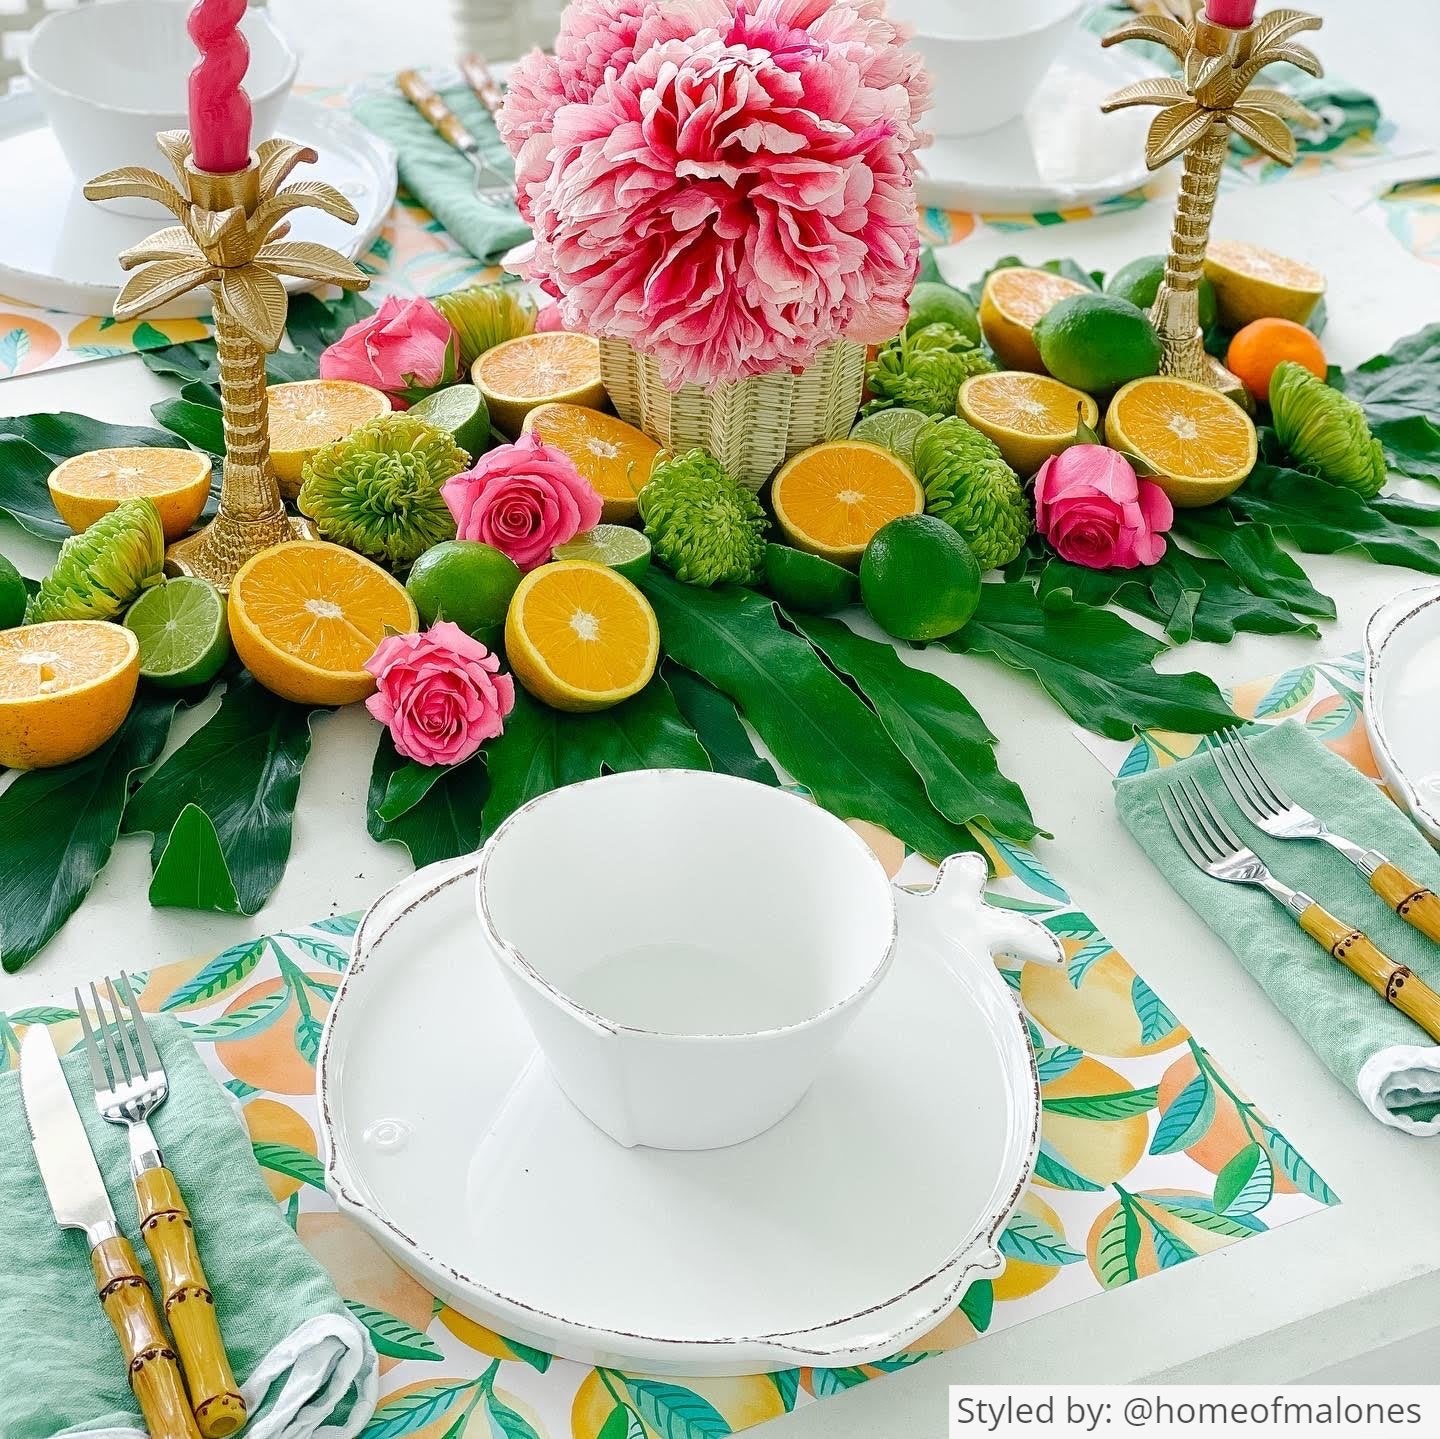 Table setting with paper placemats featuring oranges layered with white dishes and tea cups cut open oranges and green leaves as a centerpiece along with a wicker patterned paper vase wrap with pink flowers